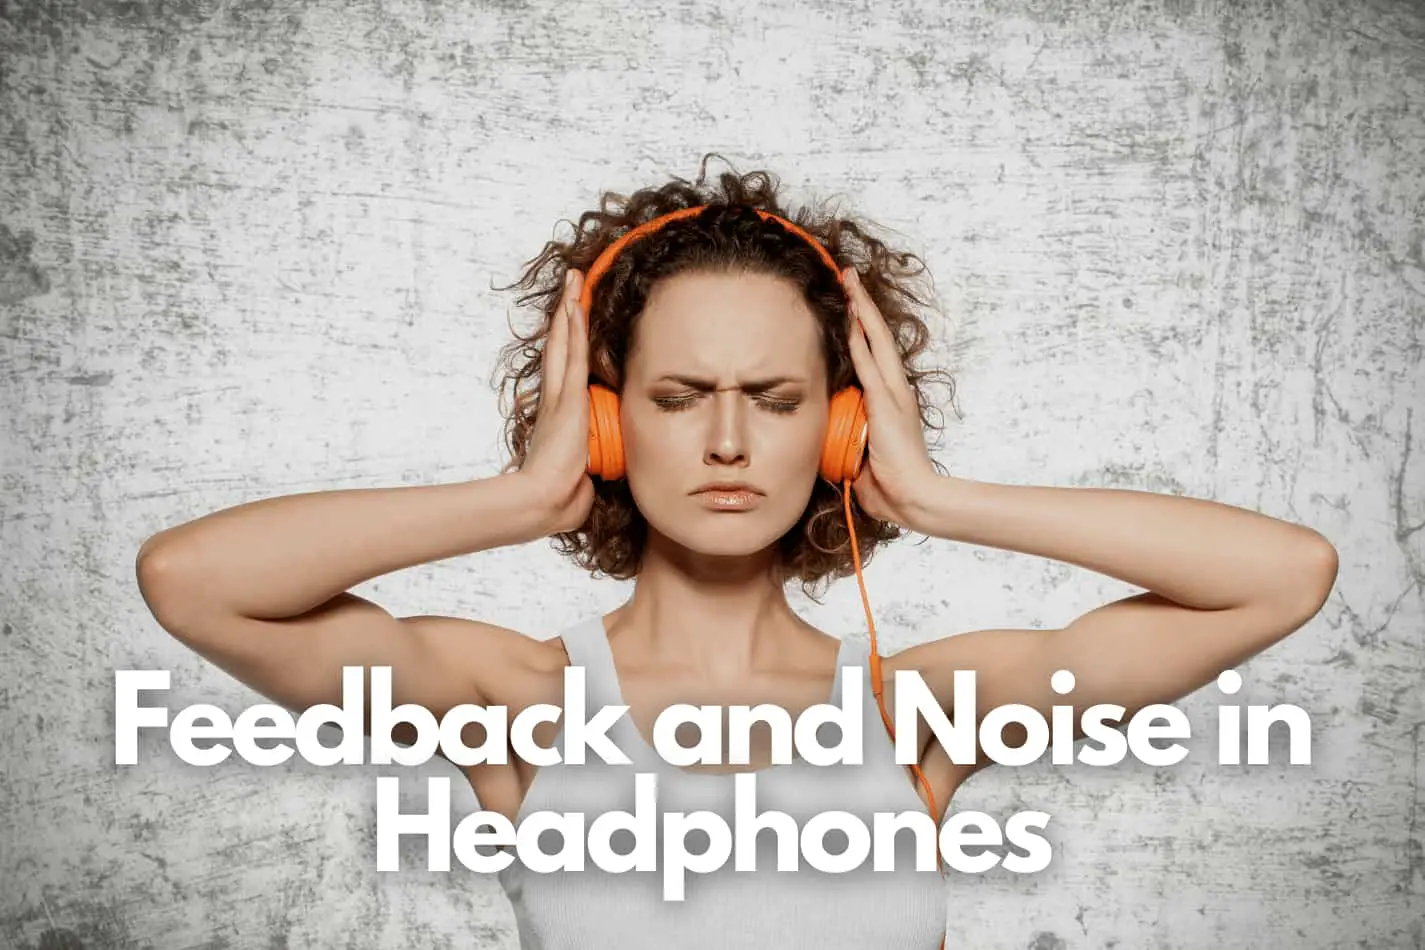 Lady holding headphones over her ears to cut out outside noise